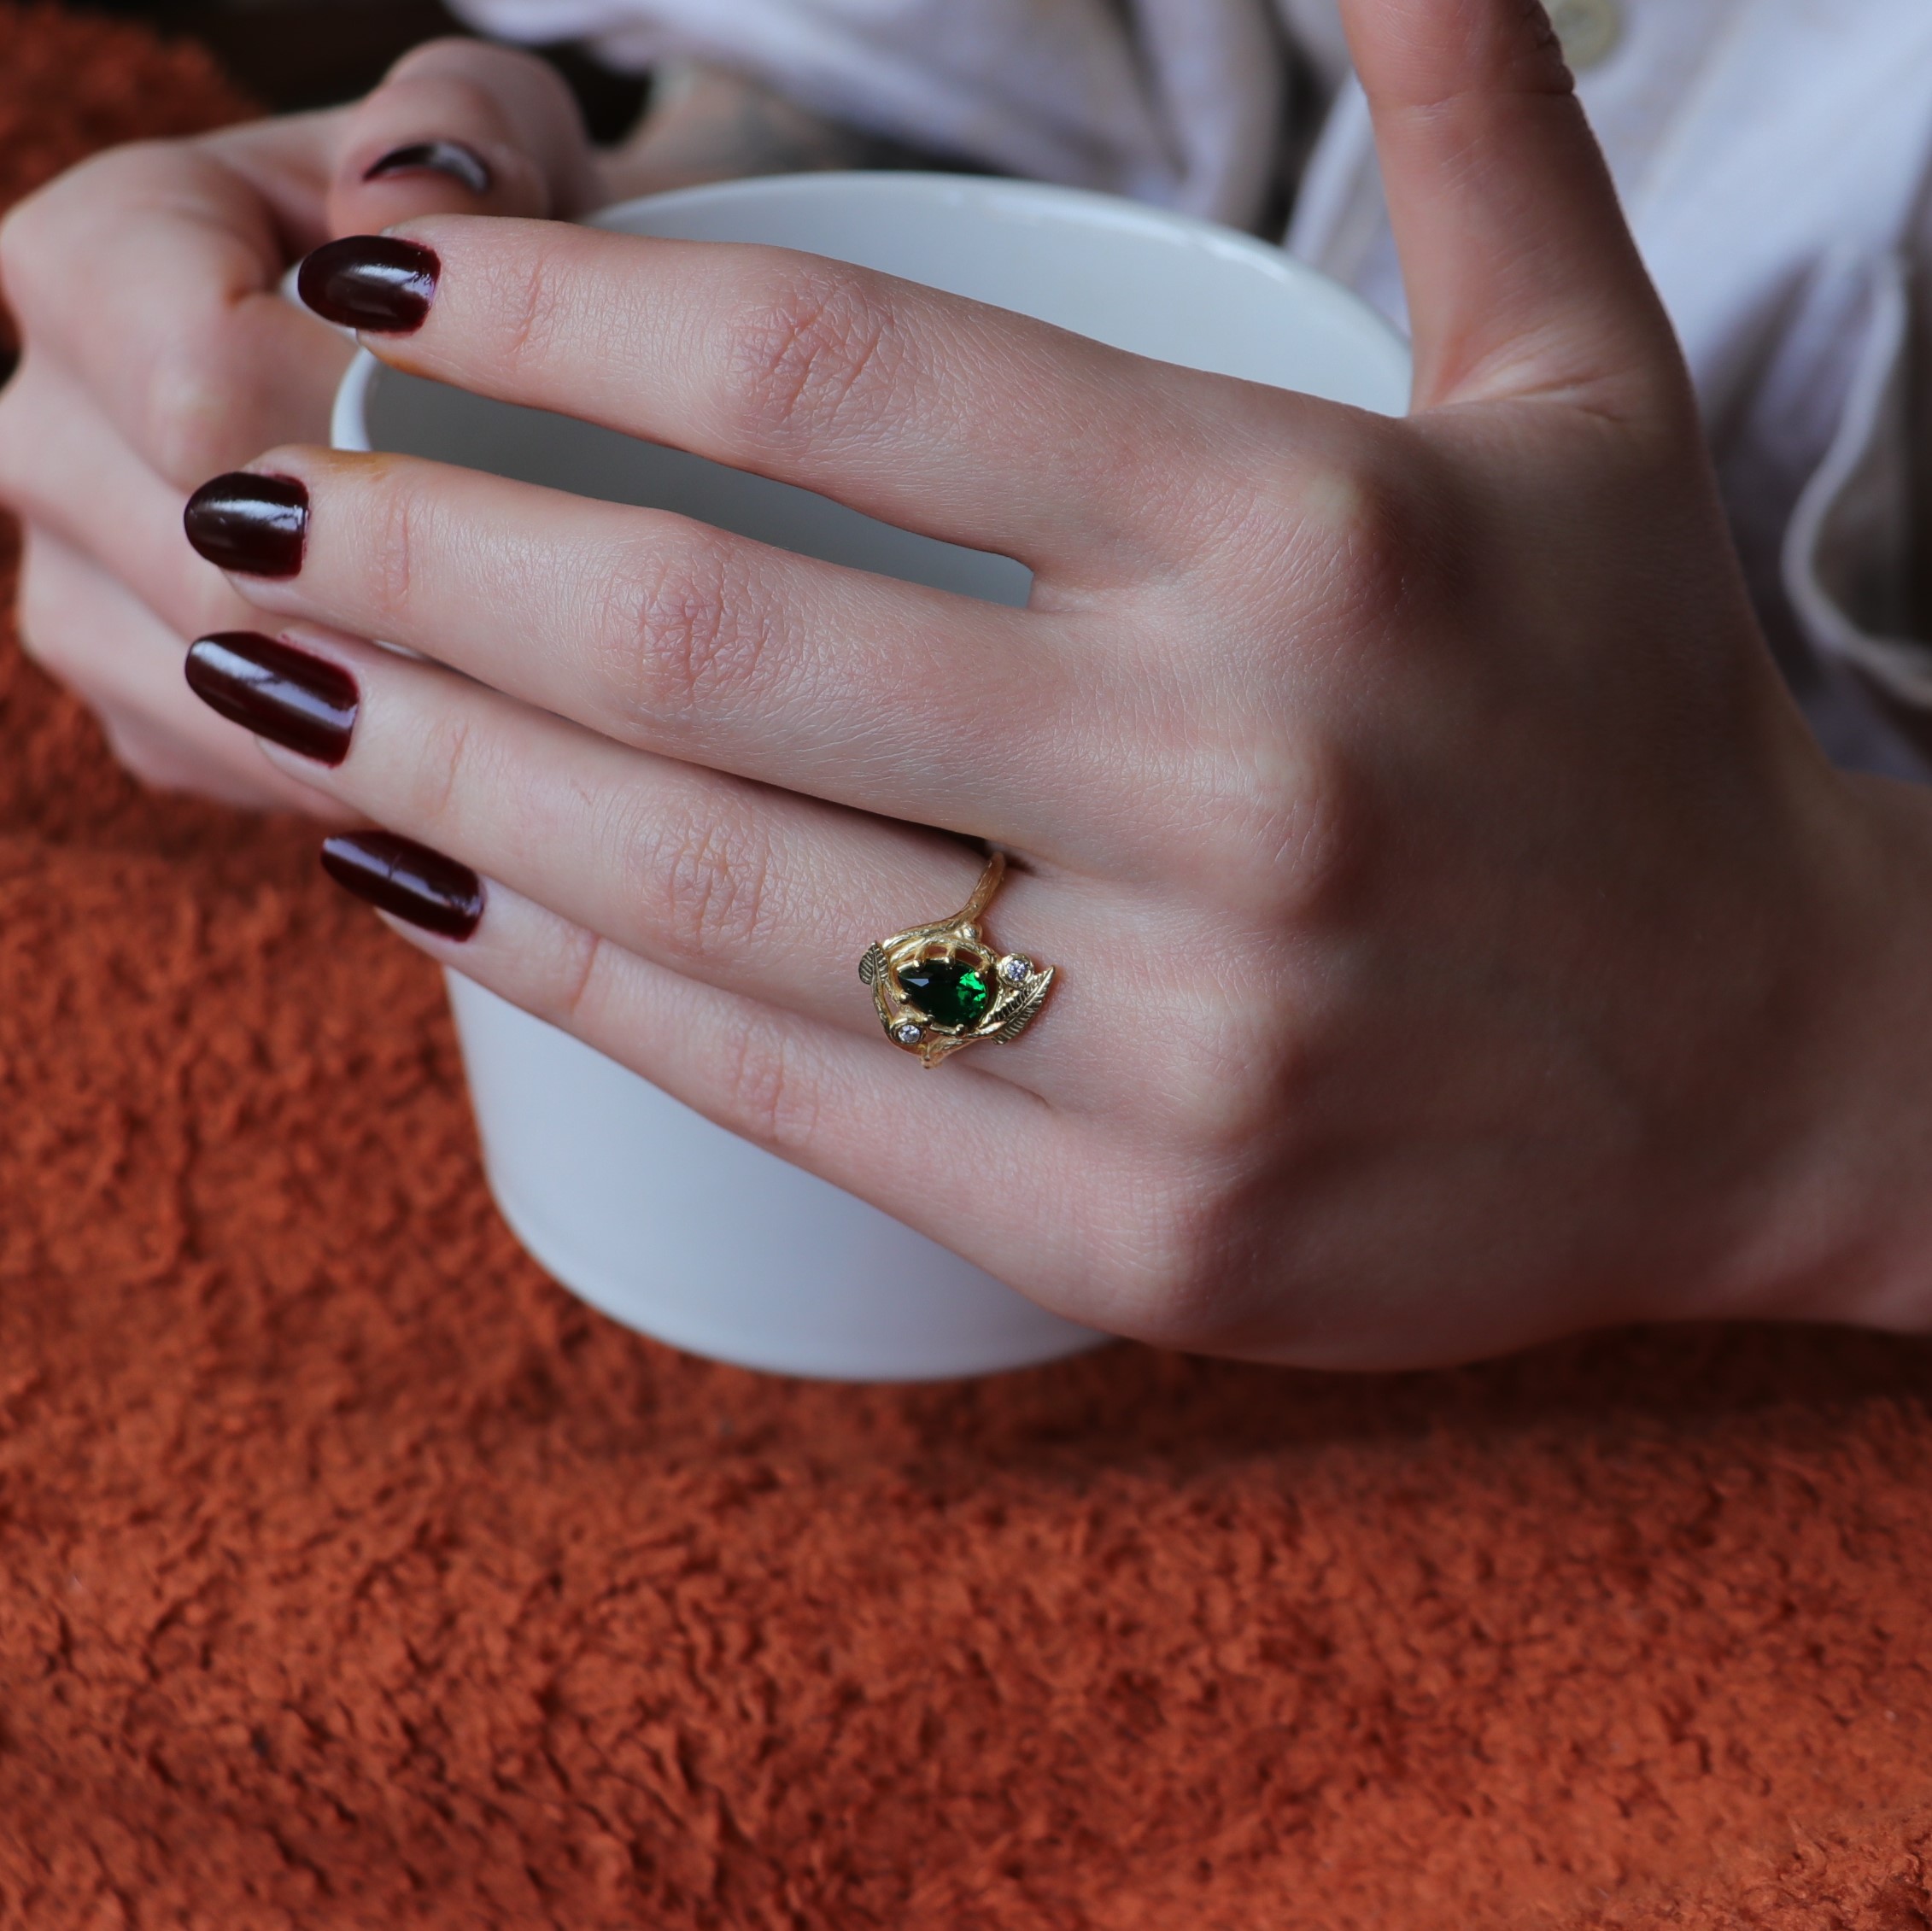 Lab. Emerald and Swarovski Leaf Ring 925 Sterling Silver Gold Plated